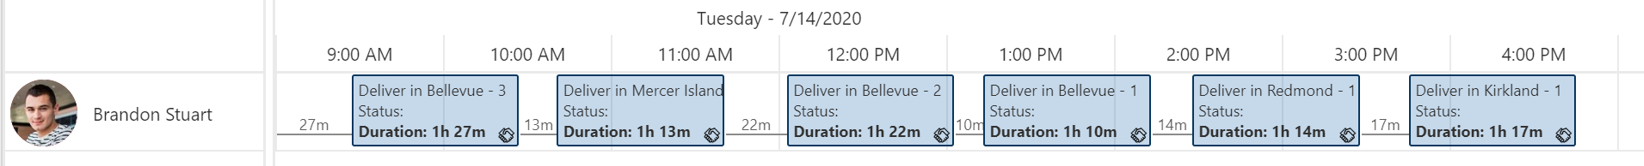 Screenshot of a schedule with predictive travel times.